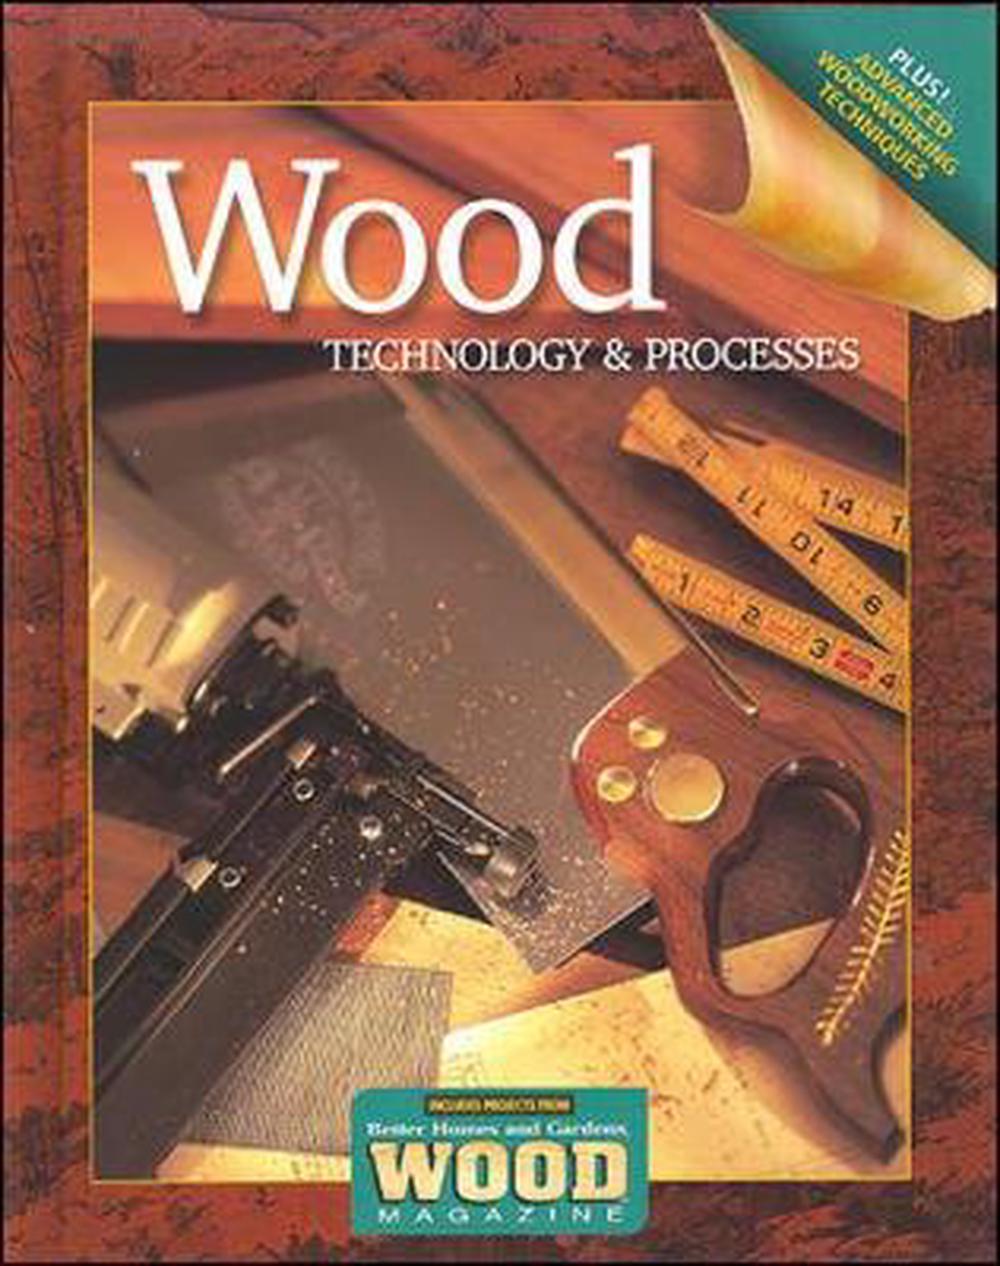 Wood Technology & Processes Student Workbook by McGrawHill (English